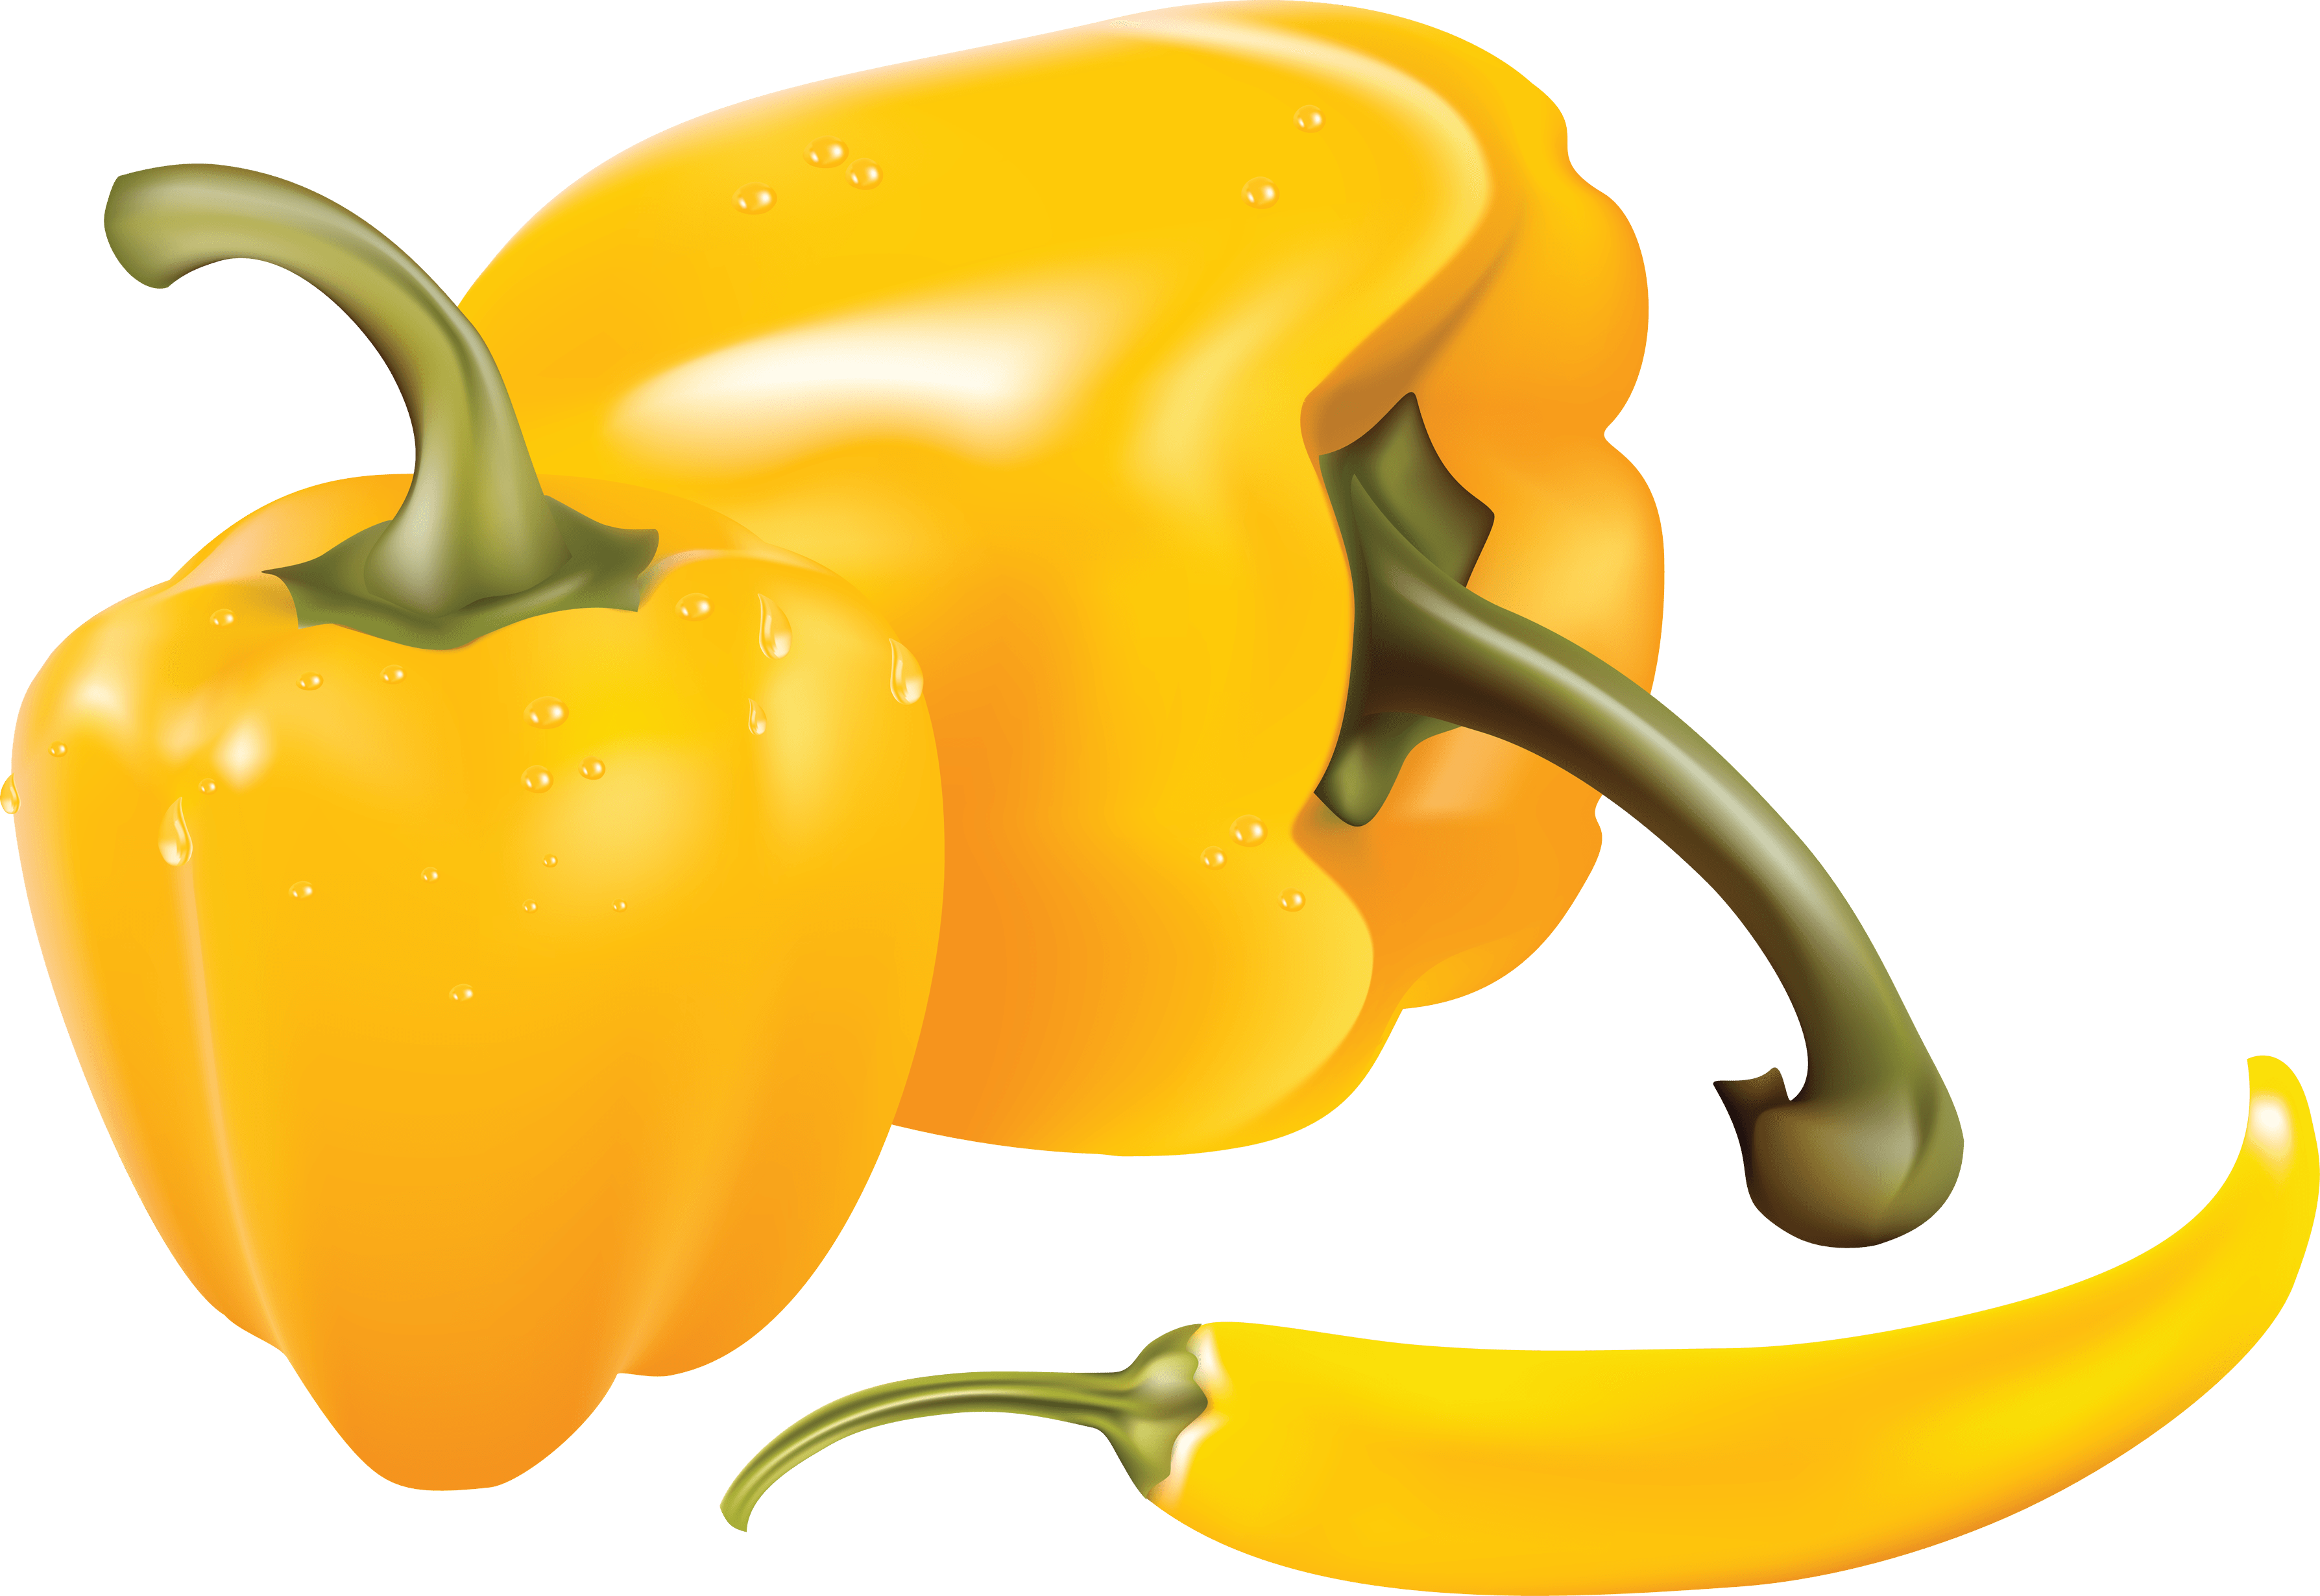 Download Download Yellow Pepper Png Image HQ PNG Image in different ...